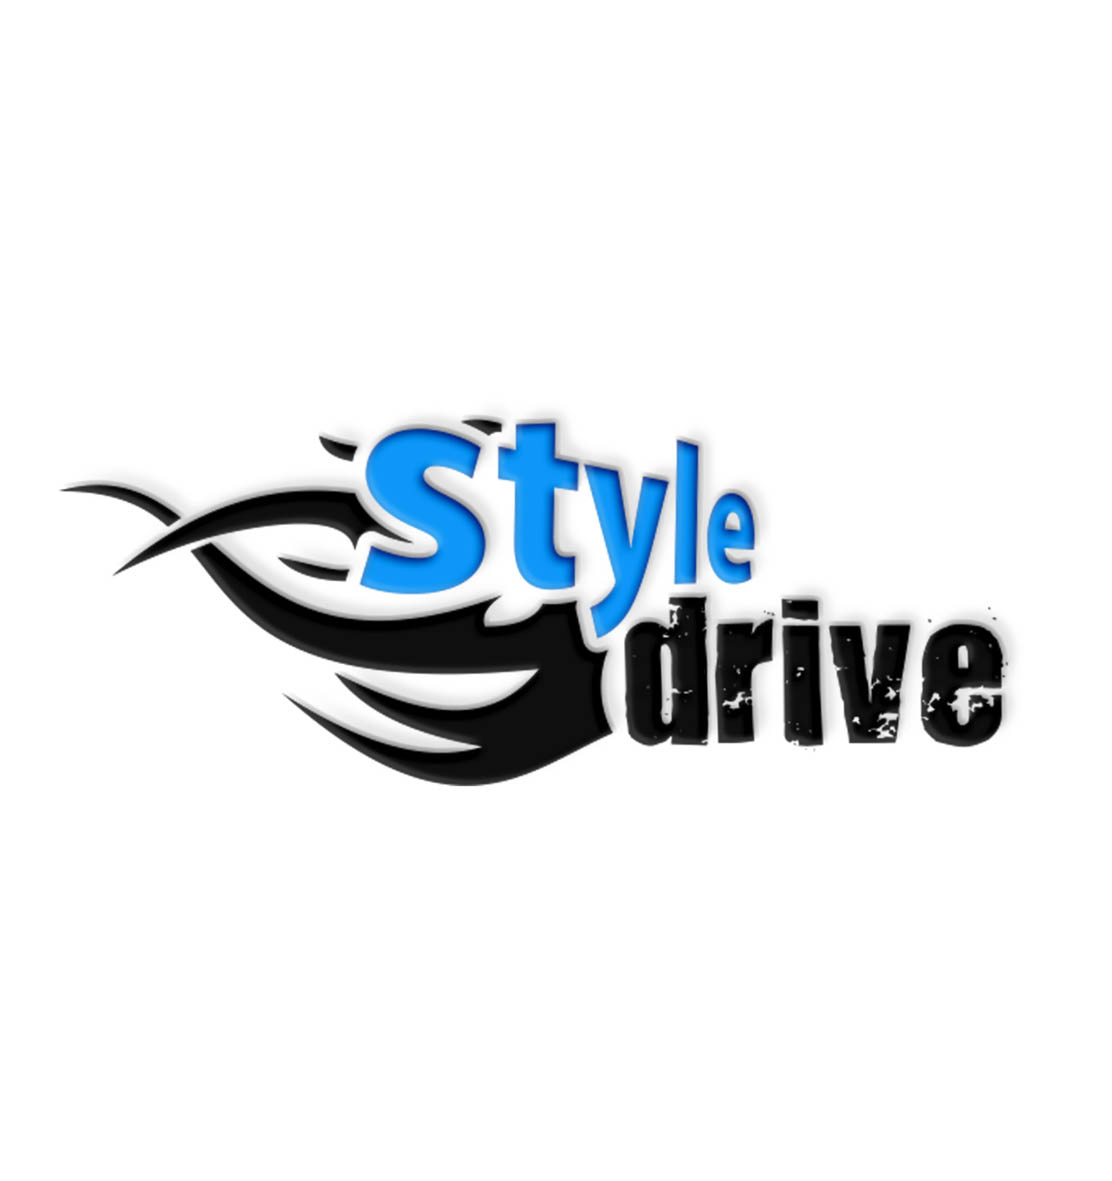 Style drive